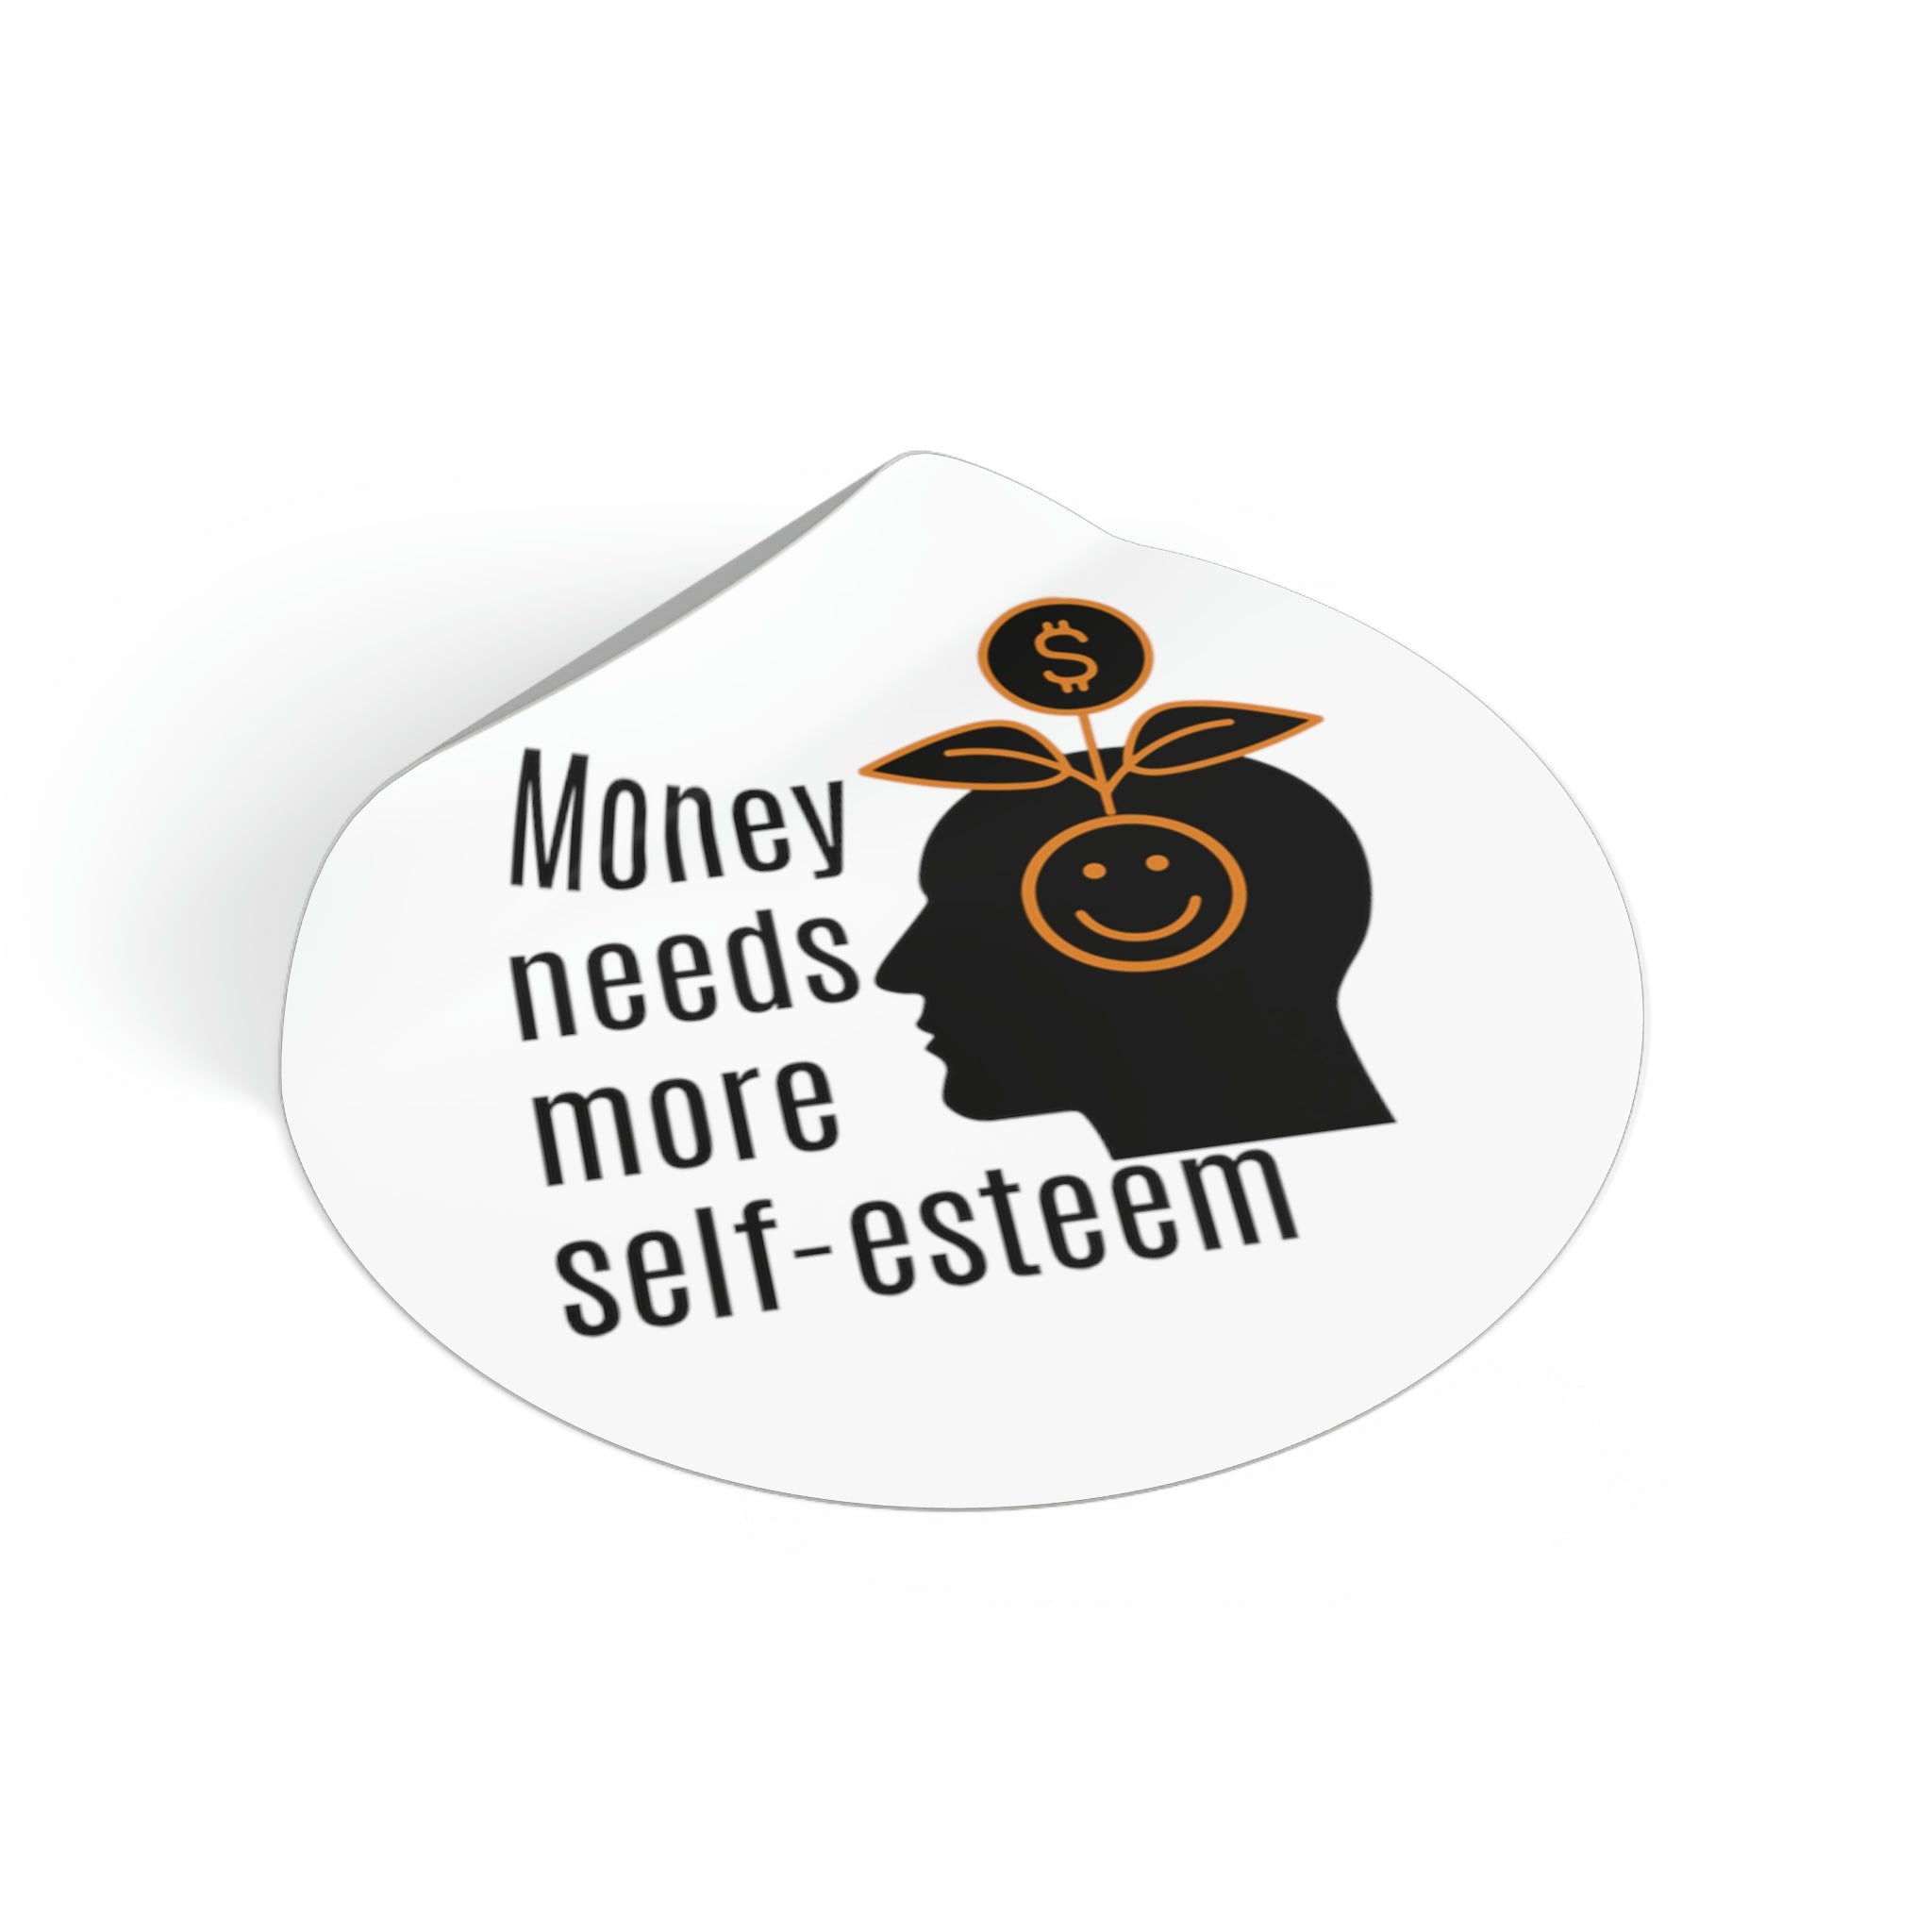 Money needs more self-esteem | Small business entrepreneur quotes #size_2x2-inches